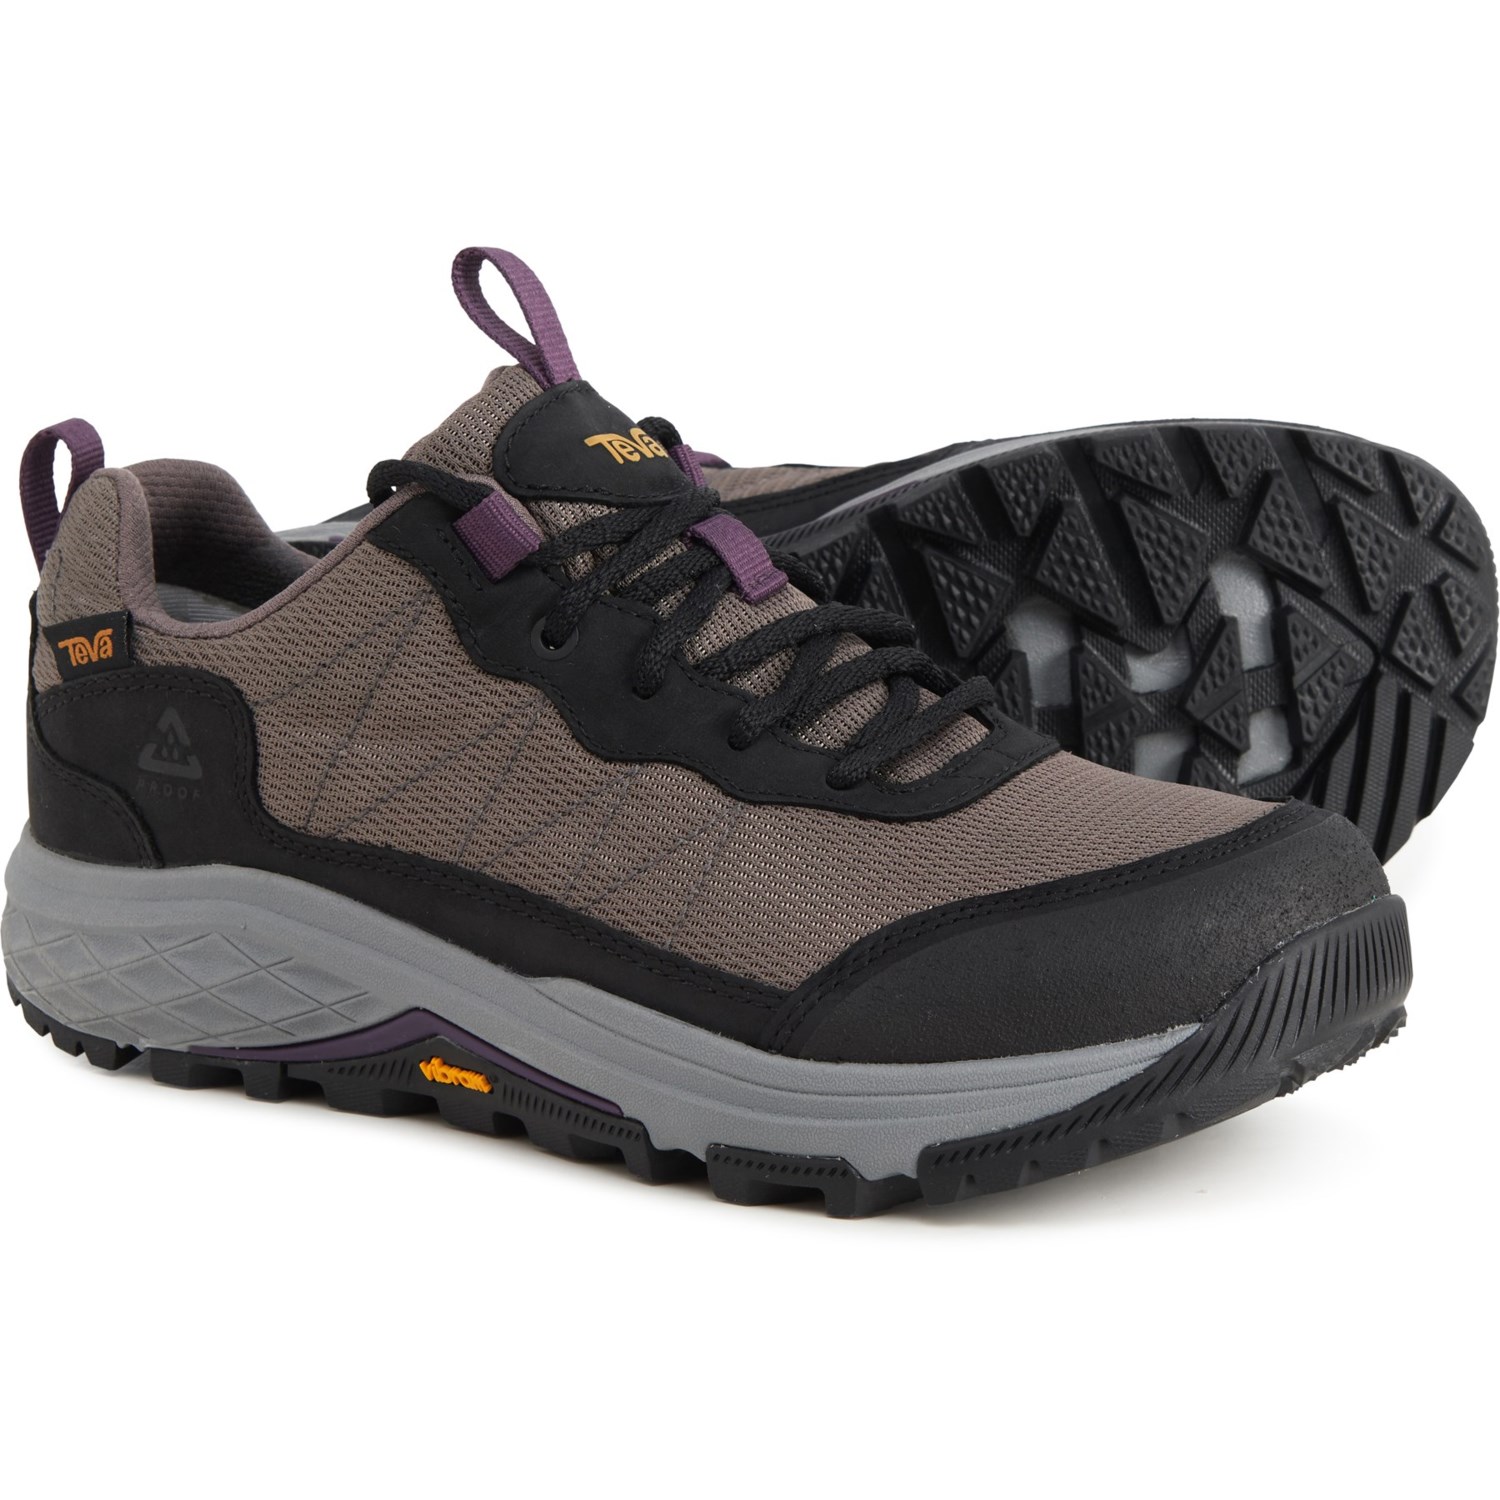 Teva Ridgeview RAPID PROOF Low Hiking Shoes (For Women) - Save 64%